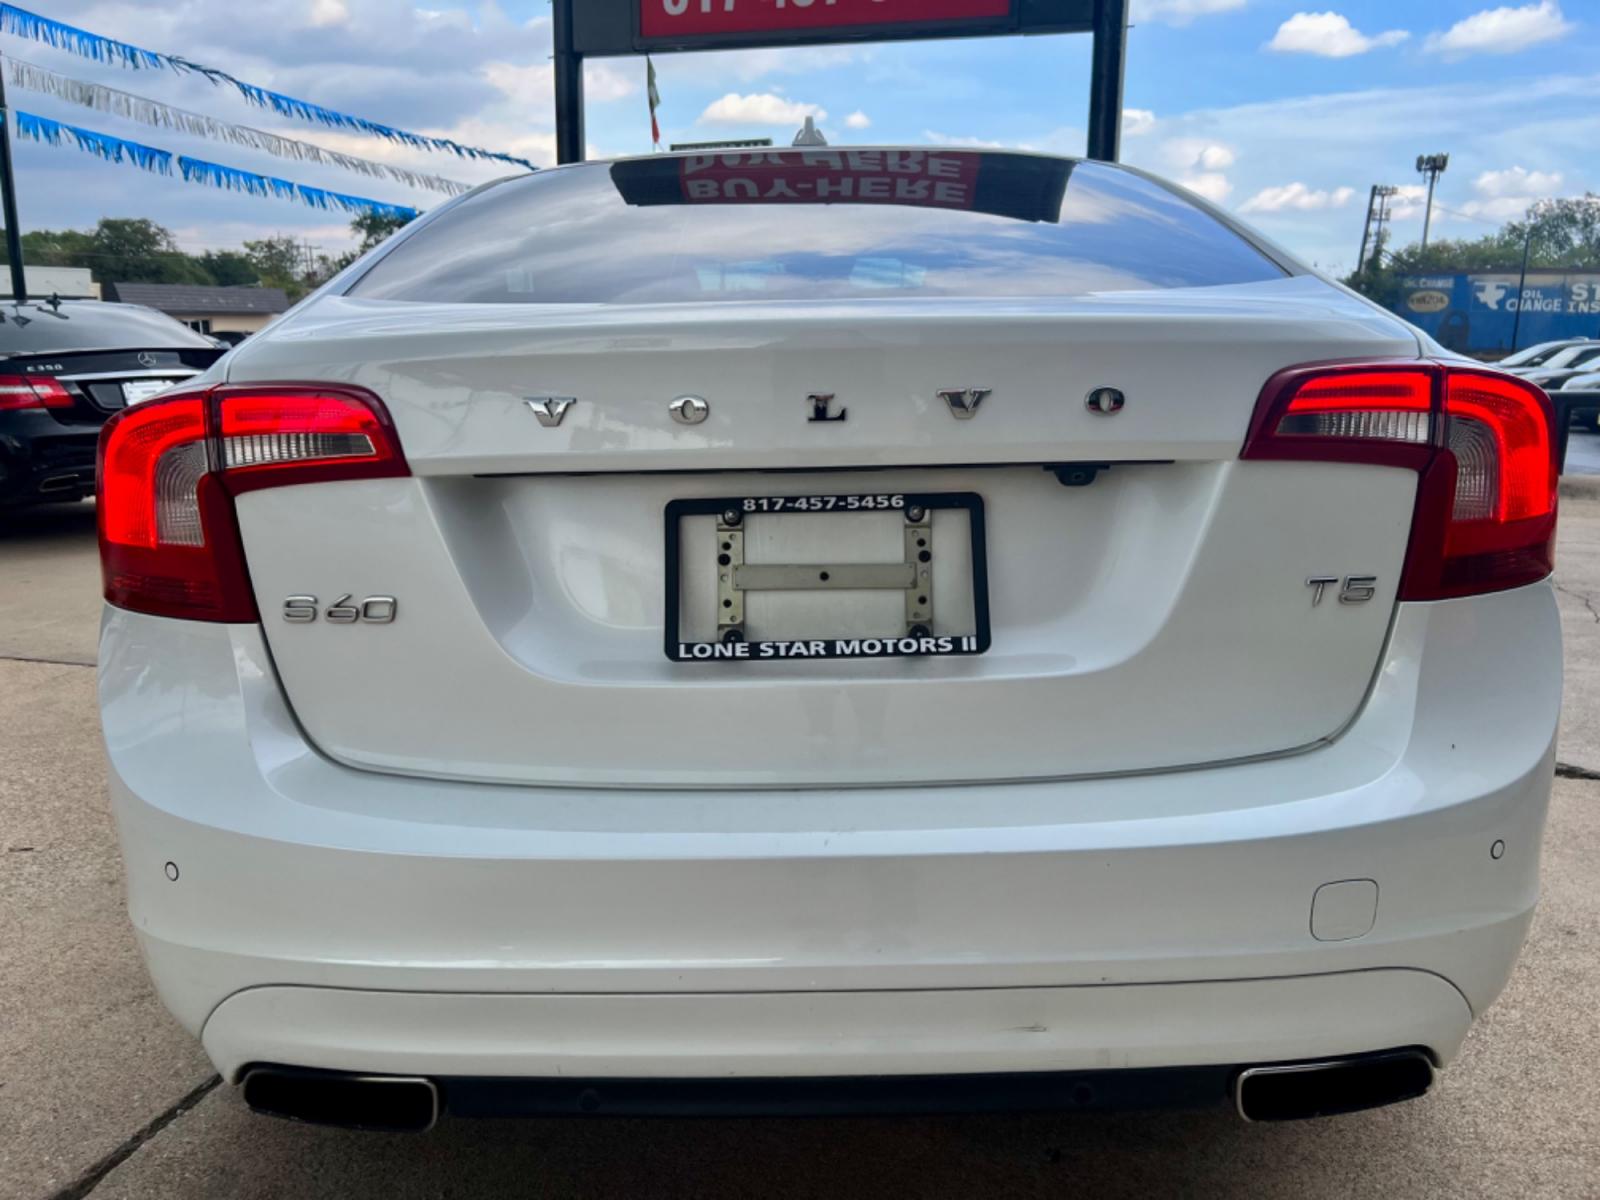 2014 WHITE VOLVO S60 T5 (YV1612FS1E2) , located at 5900 E. Lancaster Ave., Fort Worth, TX, 76112, (817) 457-5456, 0.000000, 0.000000 - This is a 2014 VOLVO S60 T5 4 DOOR SEDAN that is in excellent condition. There are no dents or scratches. The interior is clean with no rips or tears or stains. All power windows, door locks and seats. Ice cold AC for those hot Texas summer days. It is equipped with a CD player, AM/FM radio, AUX por - Photo #5